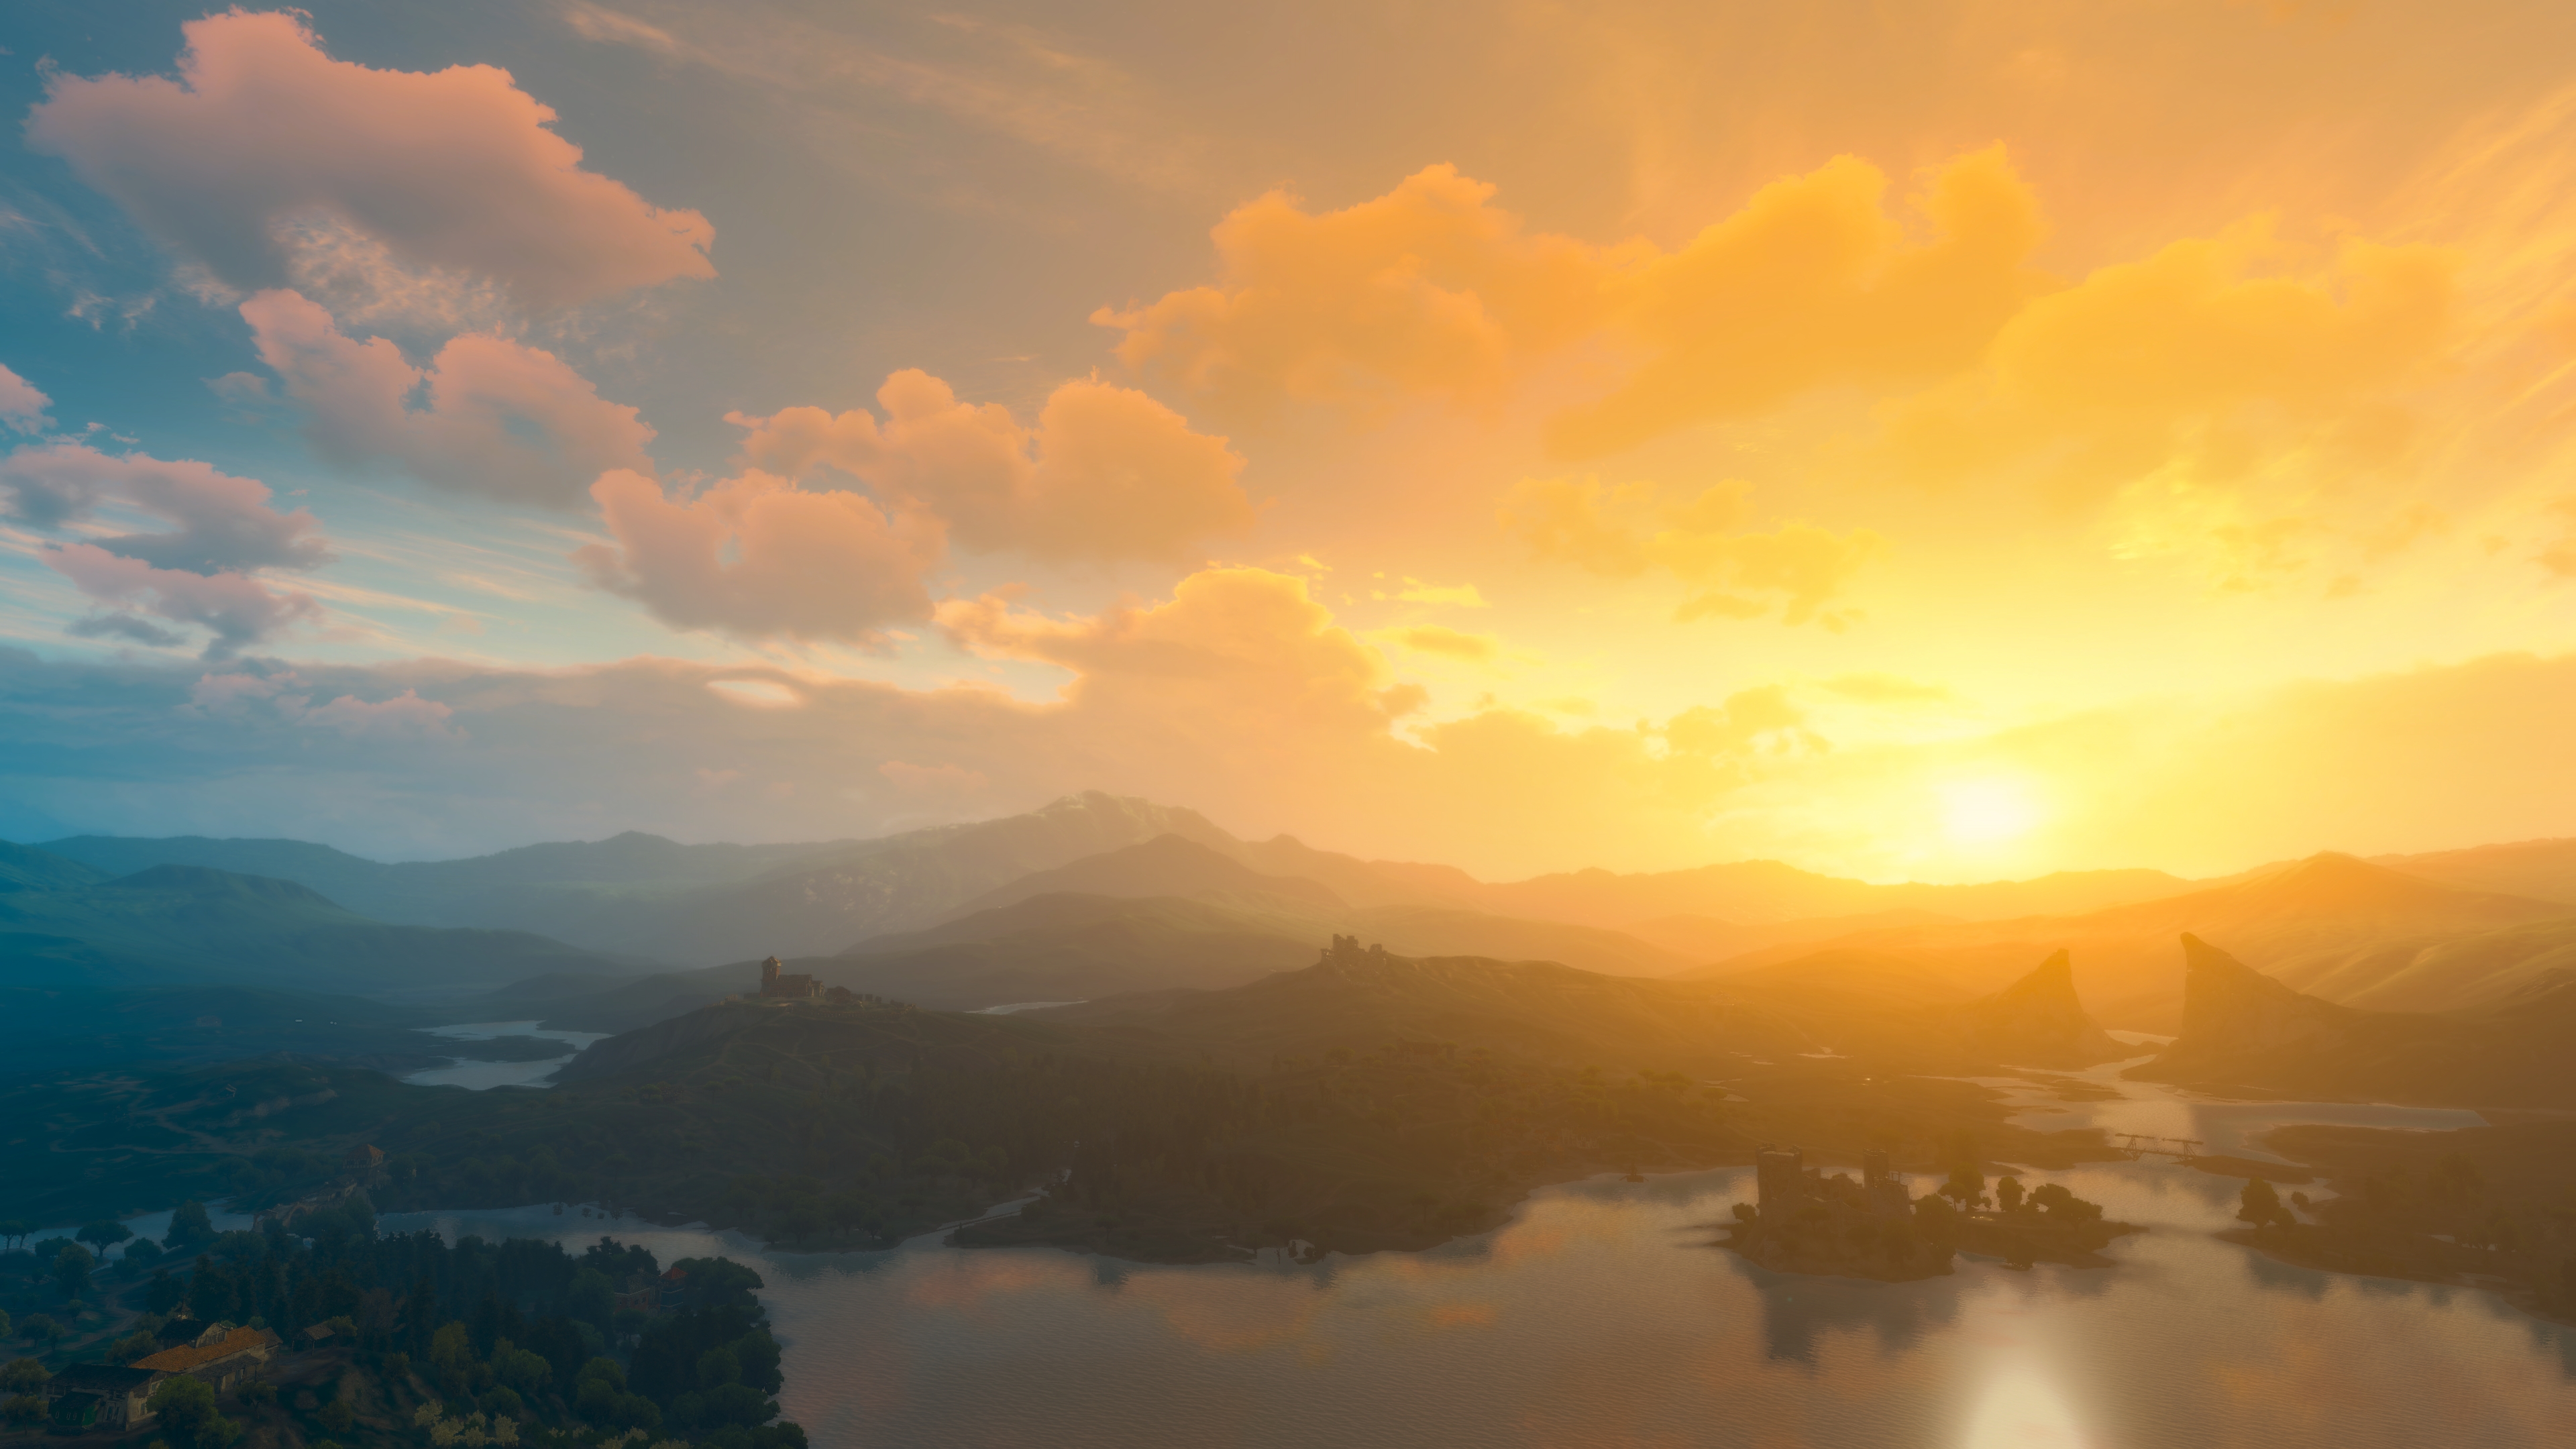 General 3840x2160 The Witcher 3: Wild Hunt PC gaming video games The Witcher 3: Wild Hunt - Blood and Wine dawn landscape mountains tussent video game art screen shot water reflection sky Sun clouds sunlight sunset sunset glow